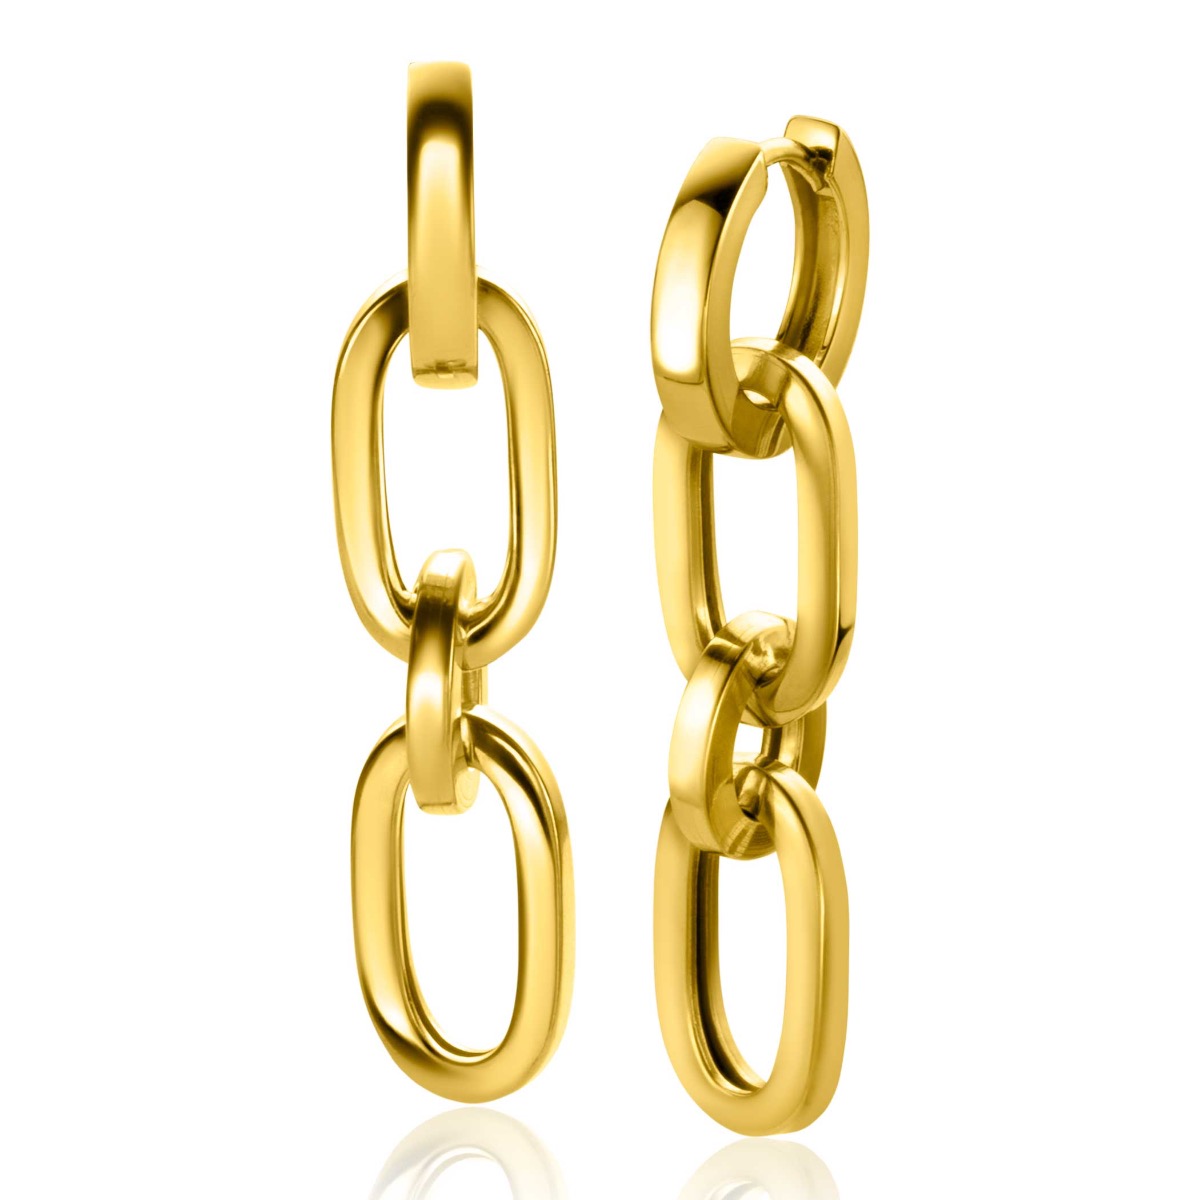 35mm ZINZI Gold Plated Sterling Silver Earrings Pendants 3 Paperclip Chains ZICH2351G (excl. hoop earrings)